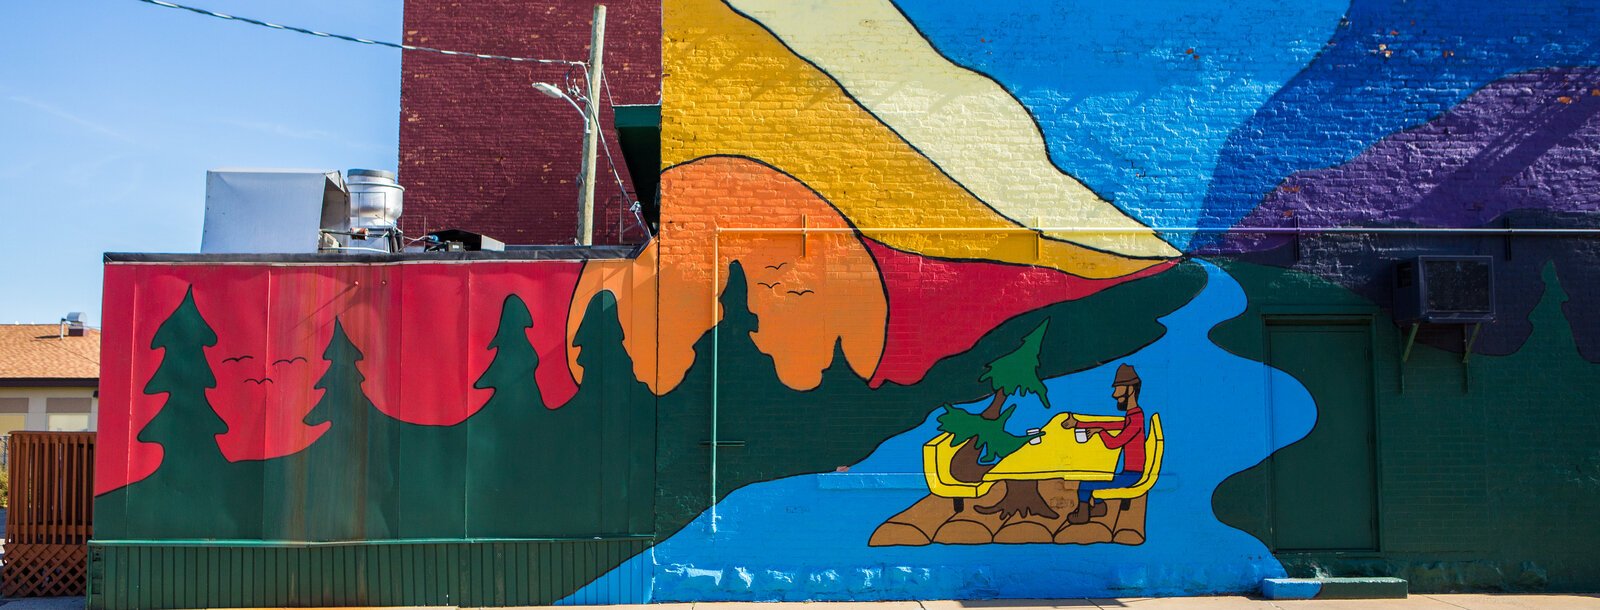 Over the past several years in Bay City, murals and public art have been popping up throughout the community, garnering attention and excitement.